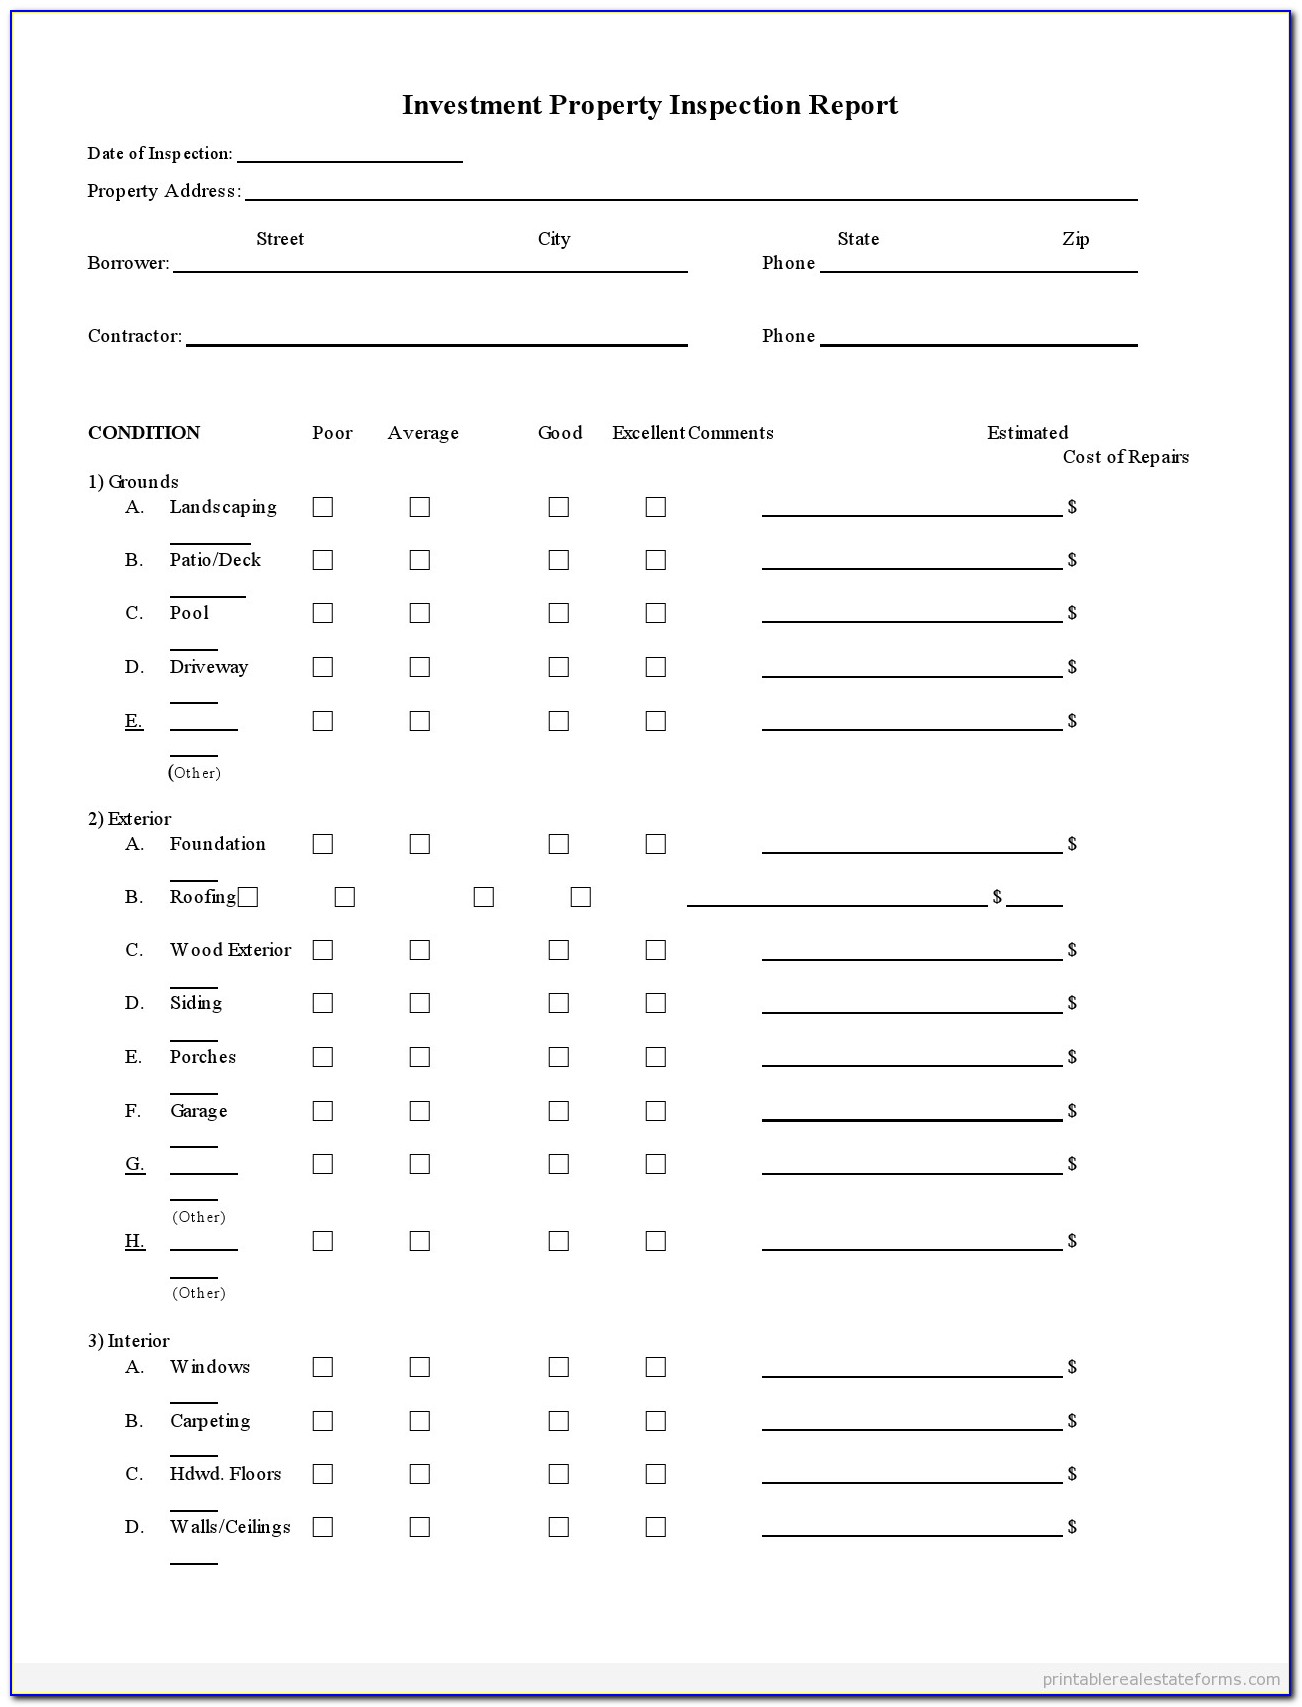 Commercial Property Inspection Report Template Awesome Sample Printable Investment Property Inspection Report Form